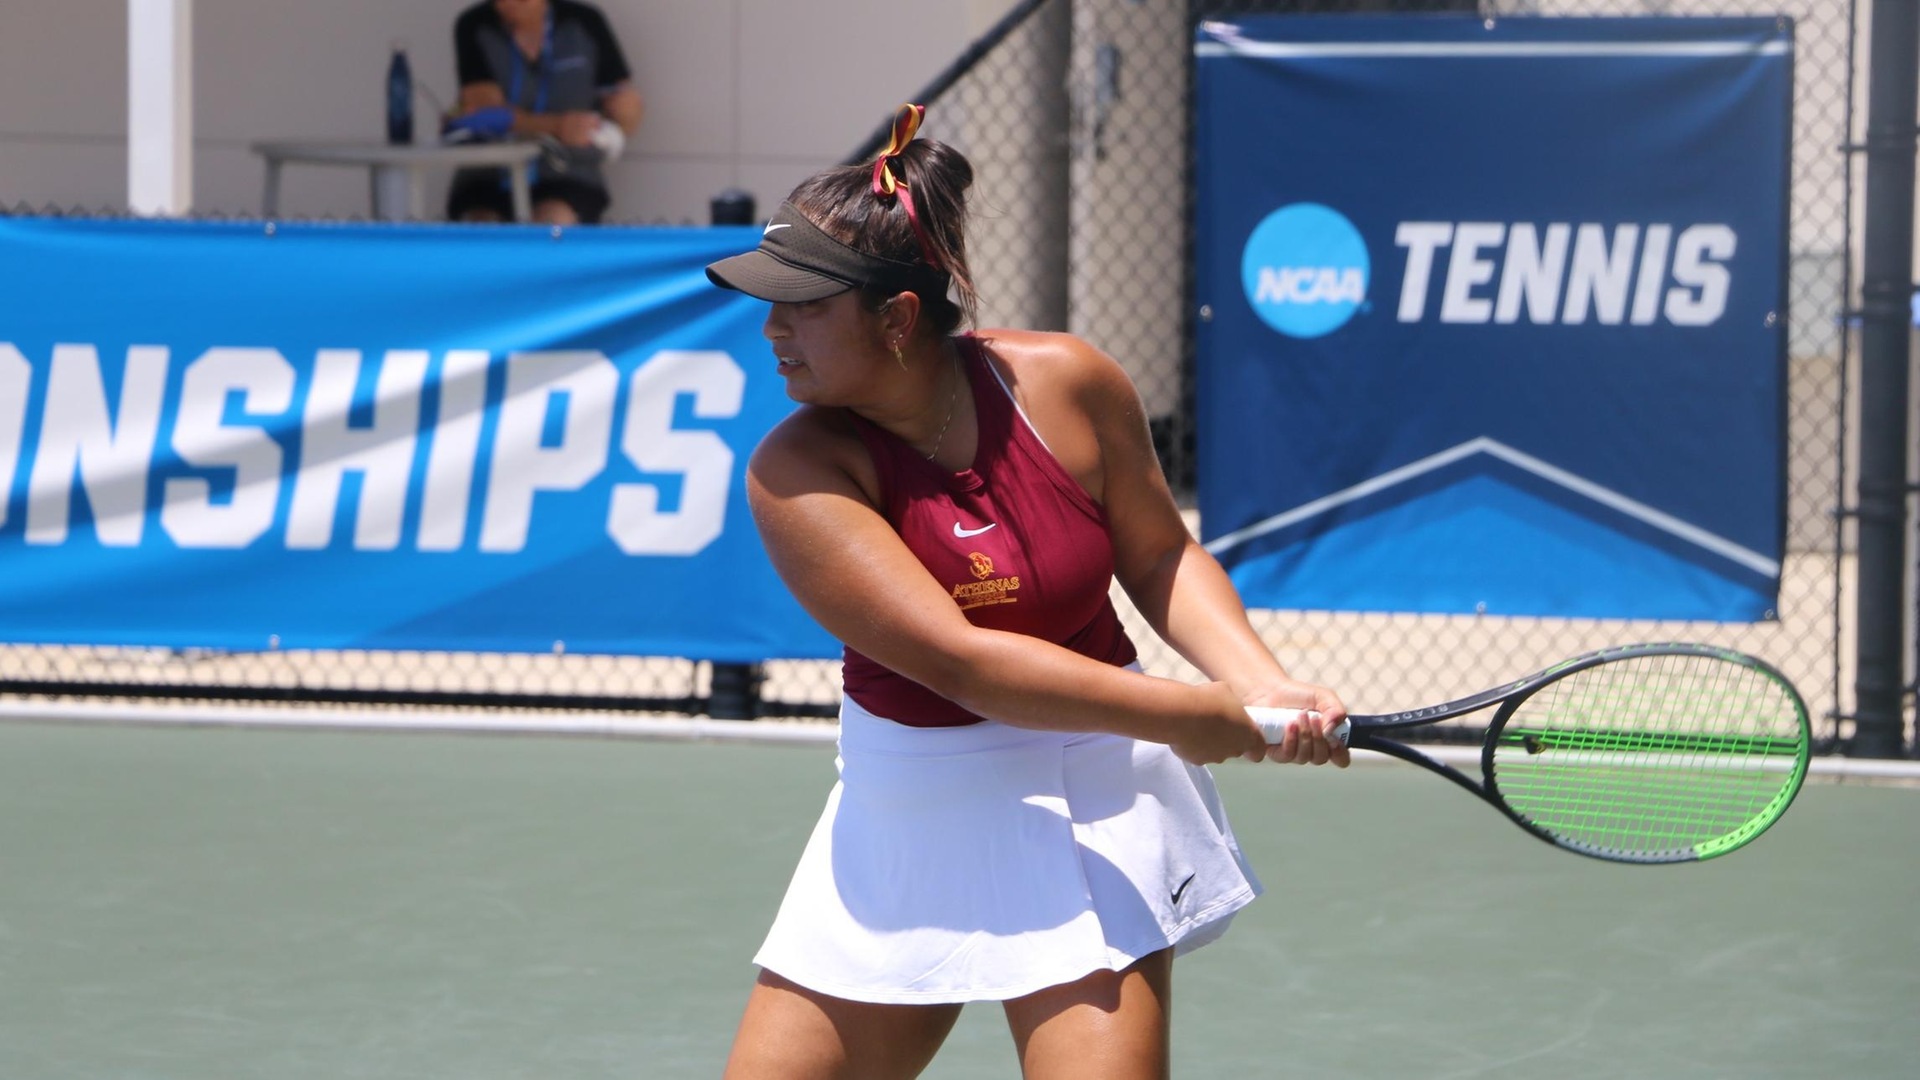 Alisha Chulani was a dual All-American in both singles and doubles